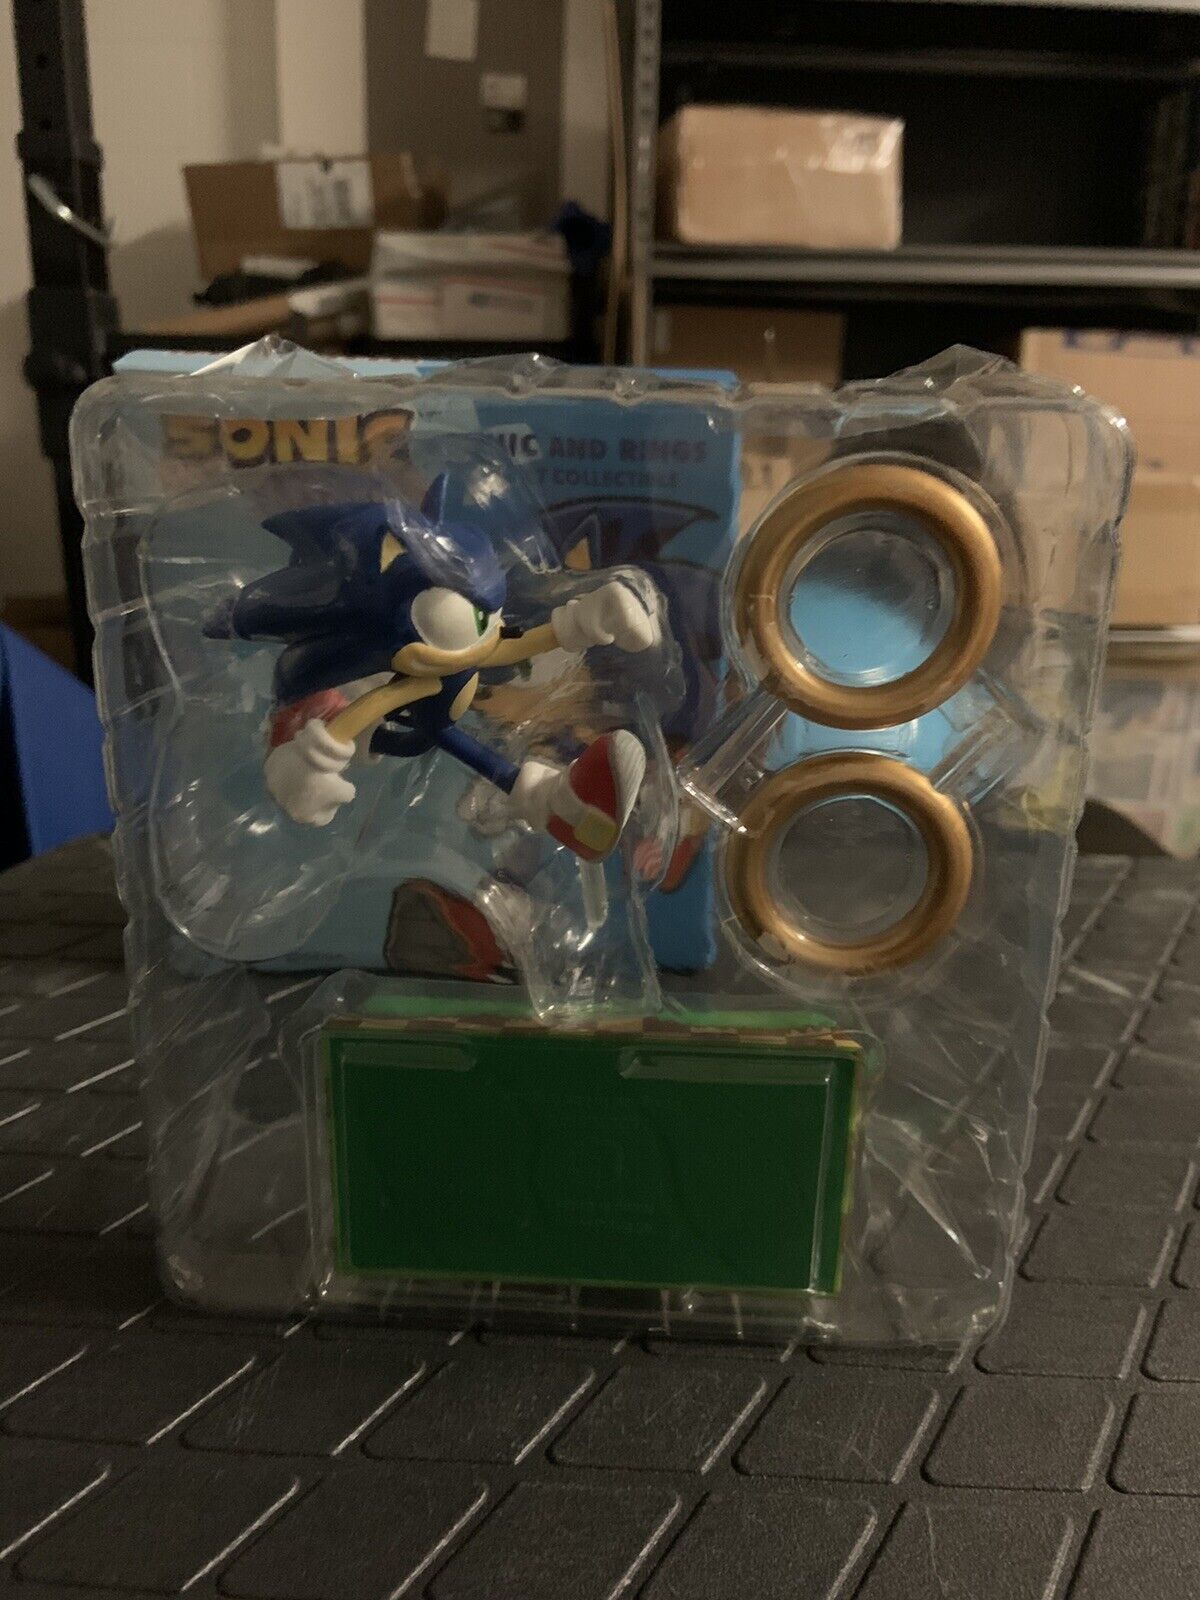 Loot Crate - Sega - Sonic the Hedgehog  and Rings - Adult Collectible Figure